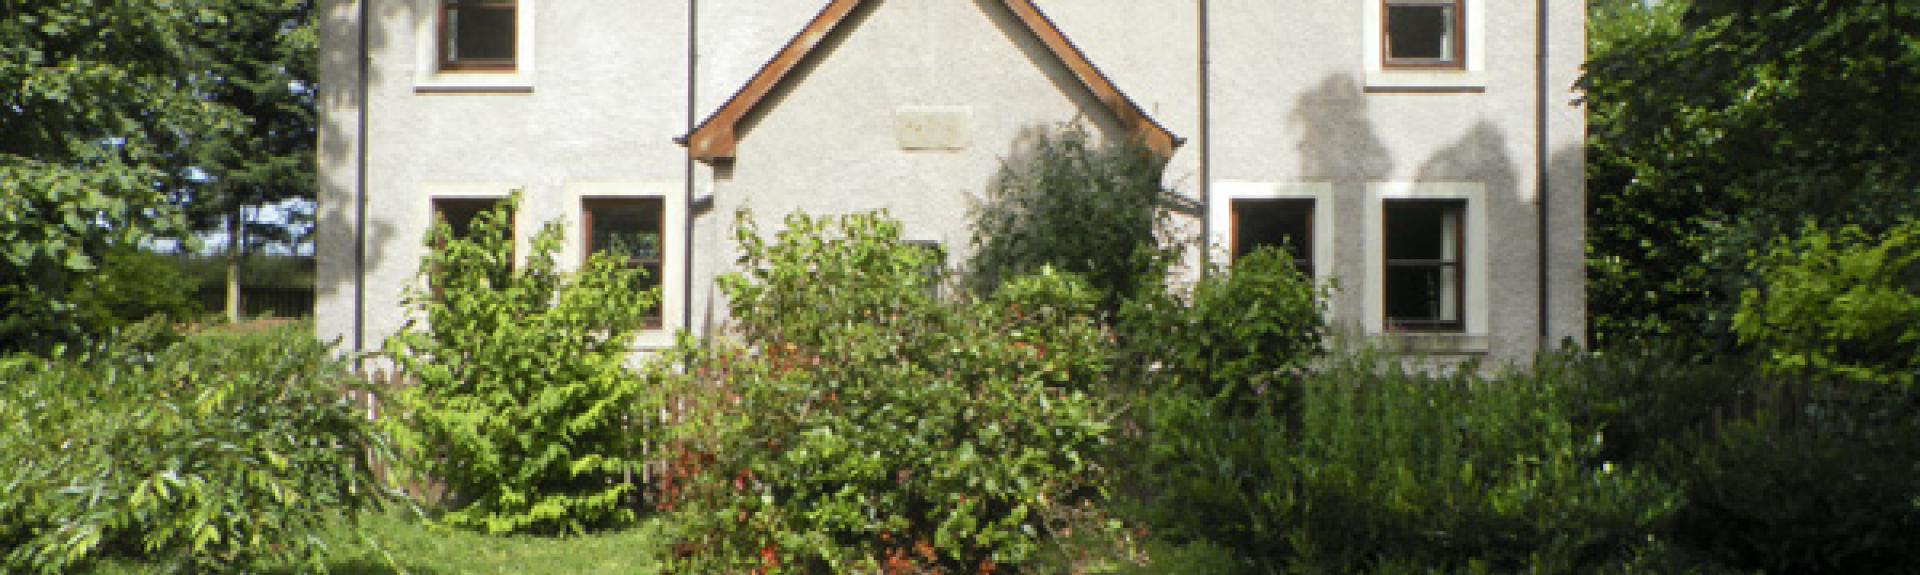 Adouble-fronted holiday cottage witha covered porch overlooks a mature front garden.